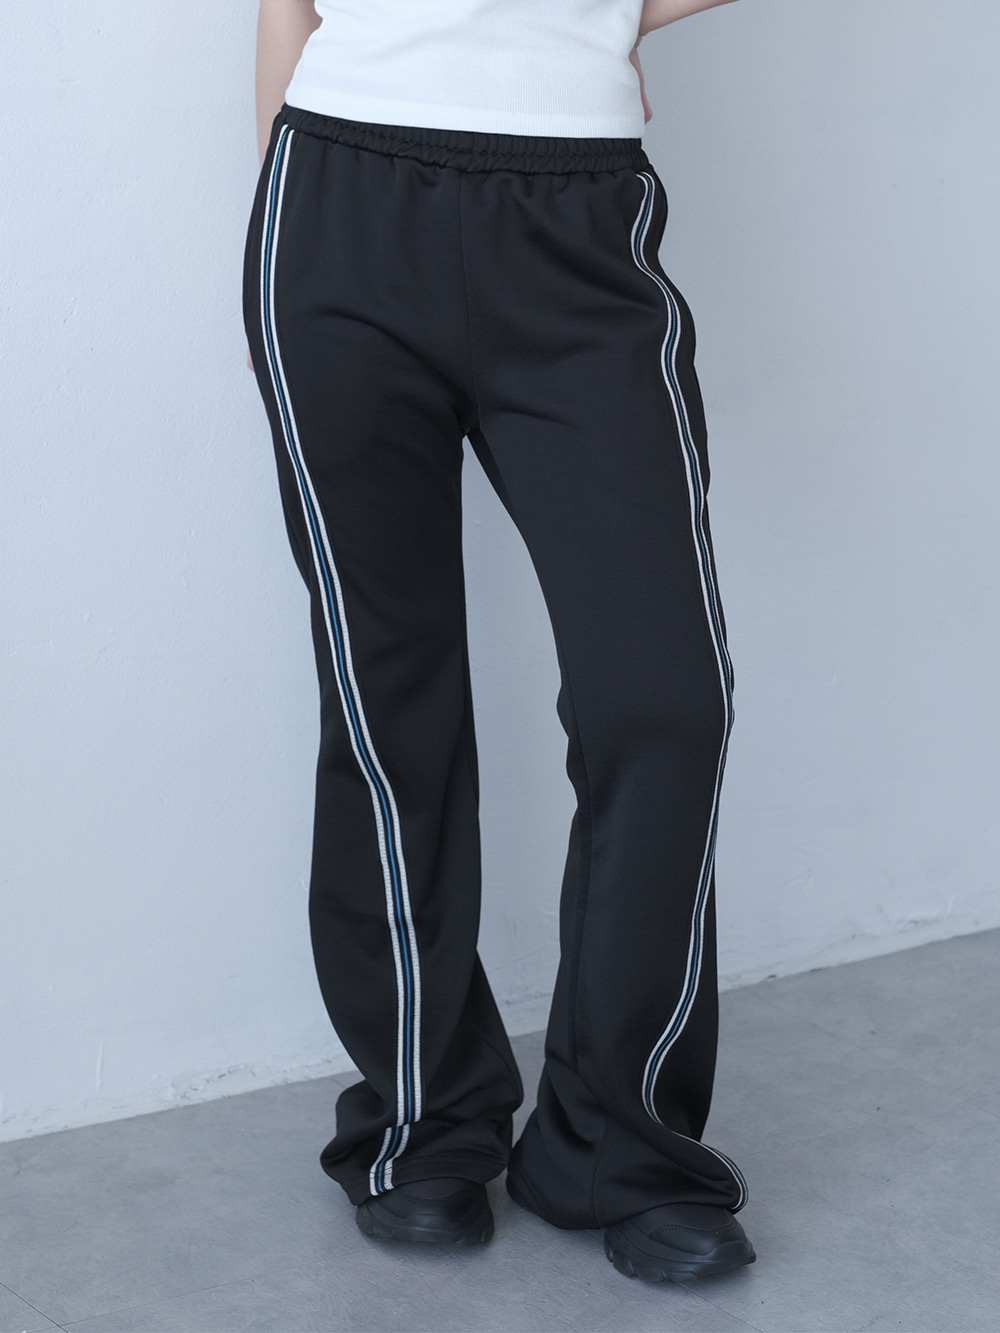 curved track boots cut pants